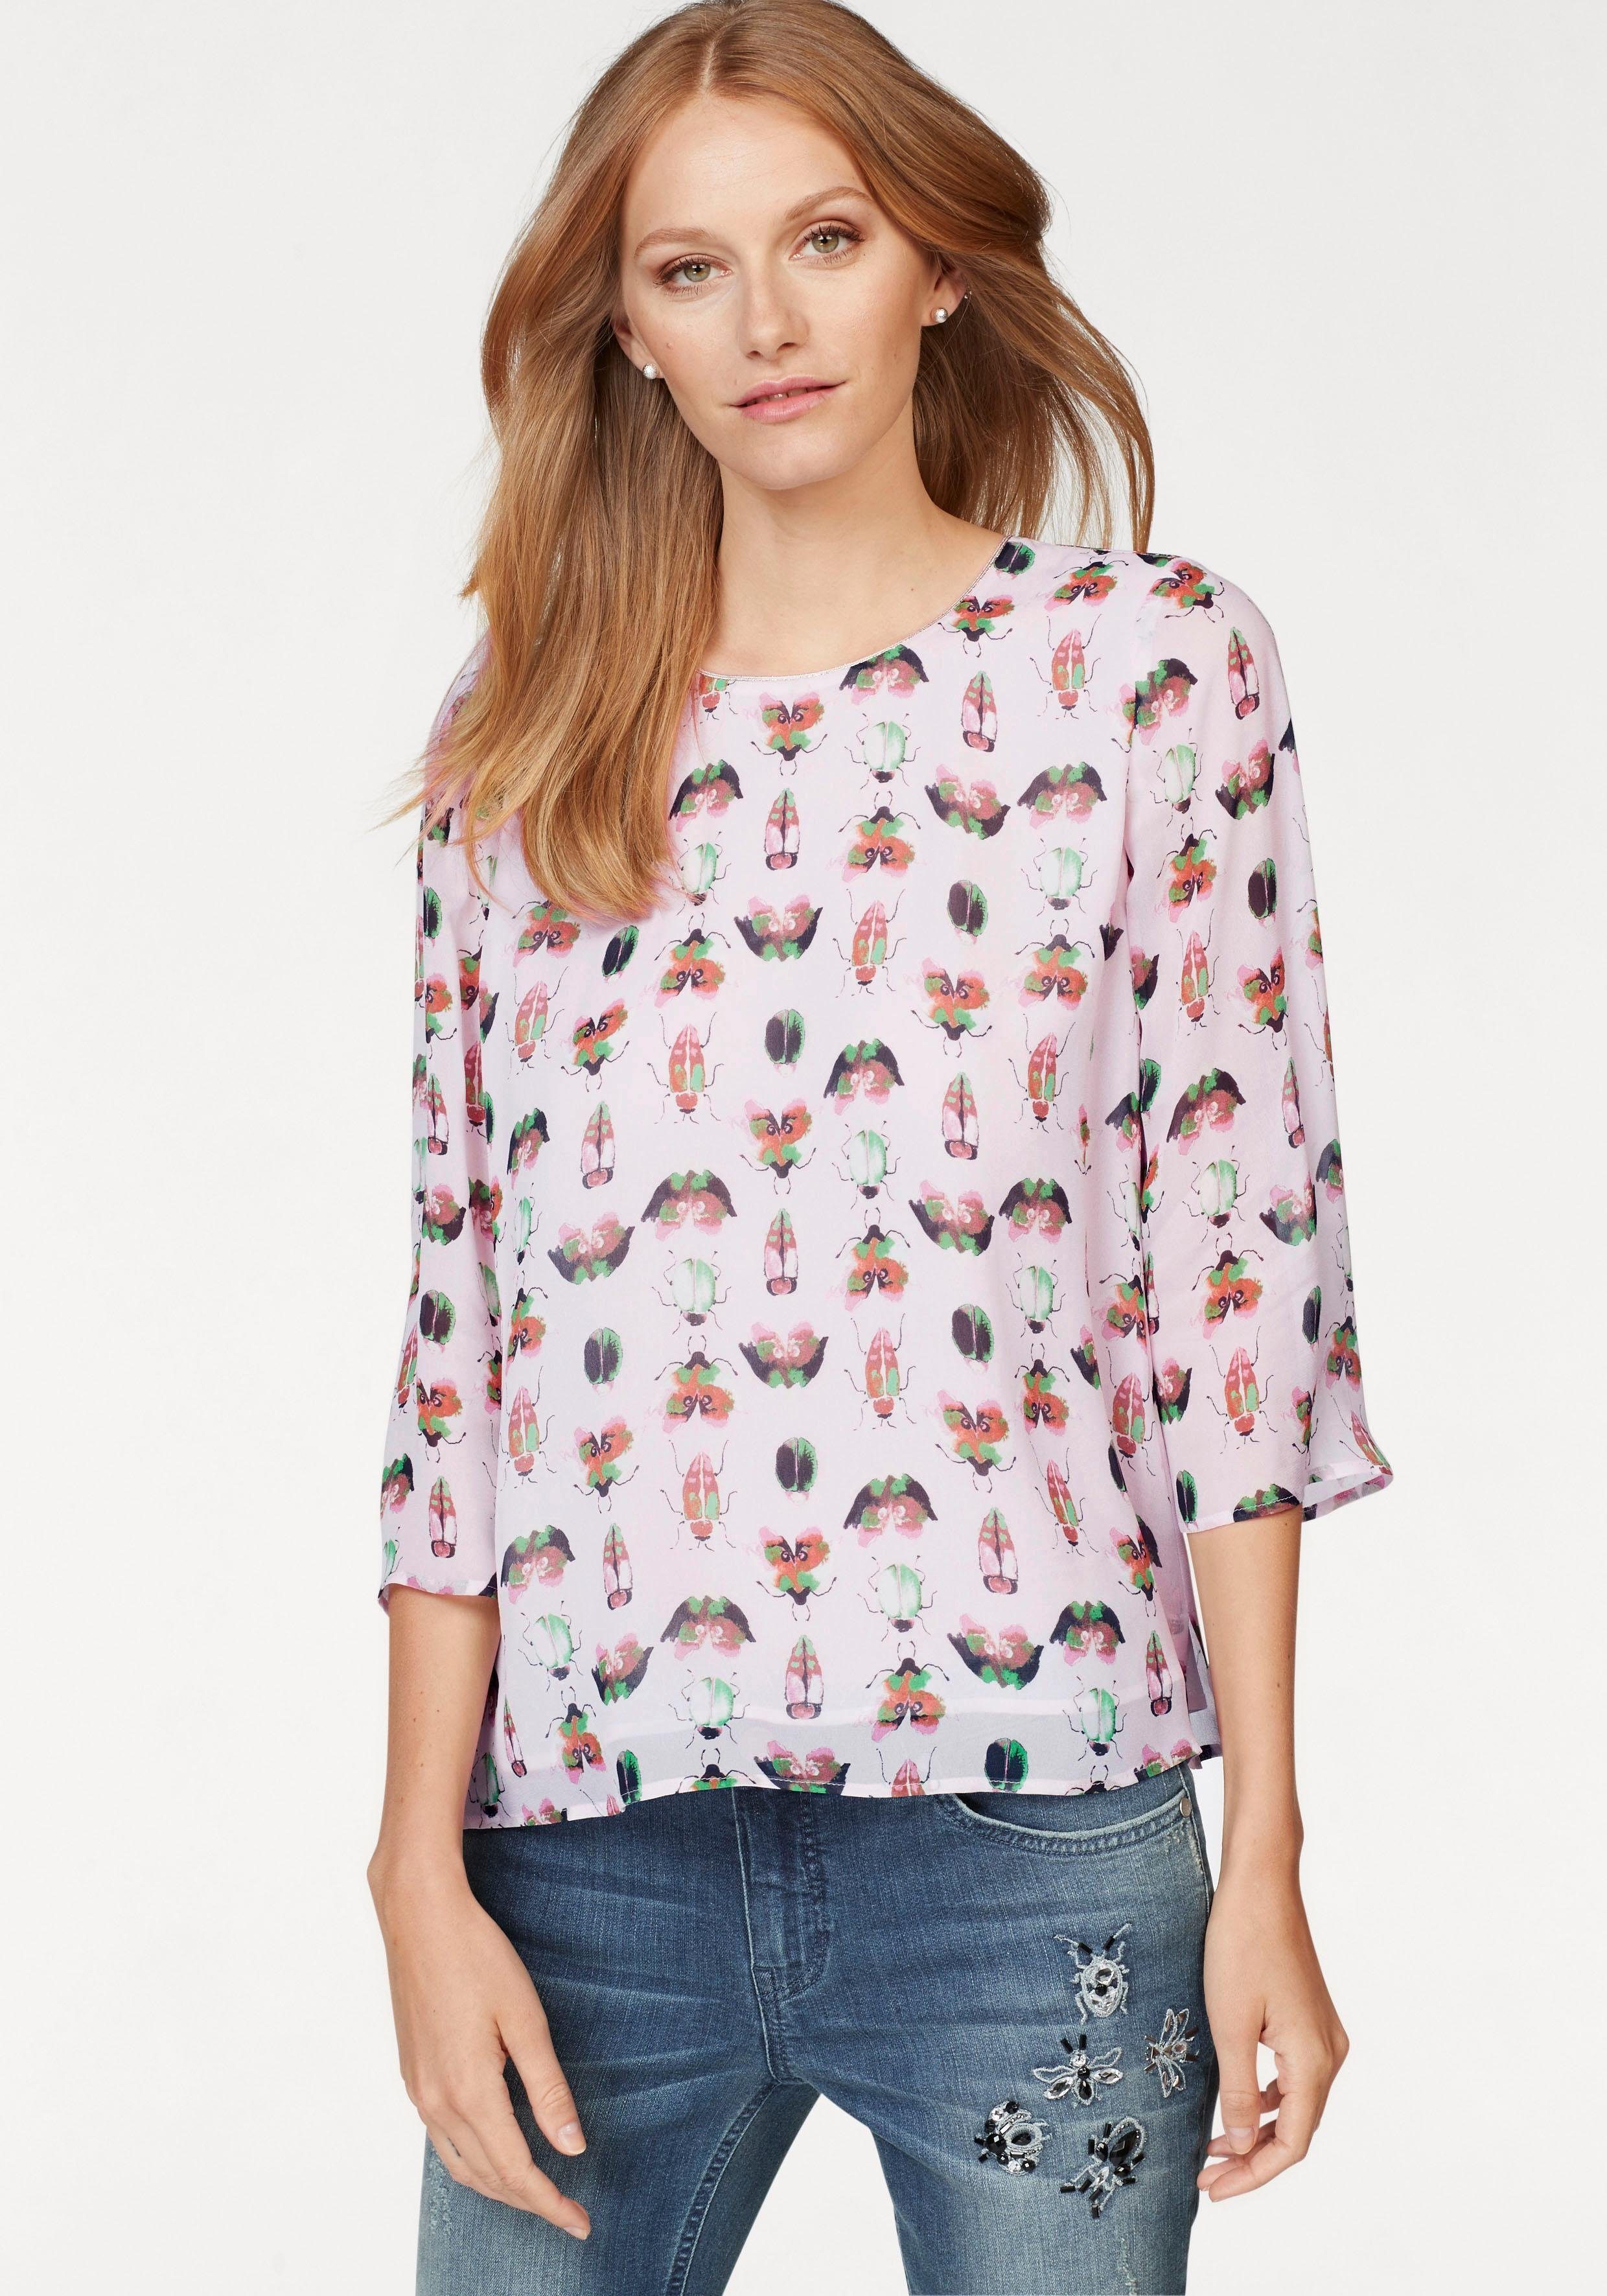 Otto - Talk About NU 15% KORTING: talk about blouse zonder sluiting